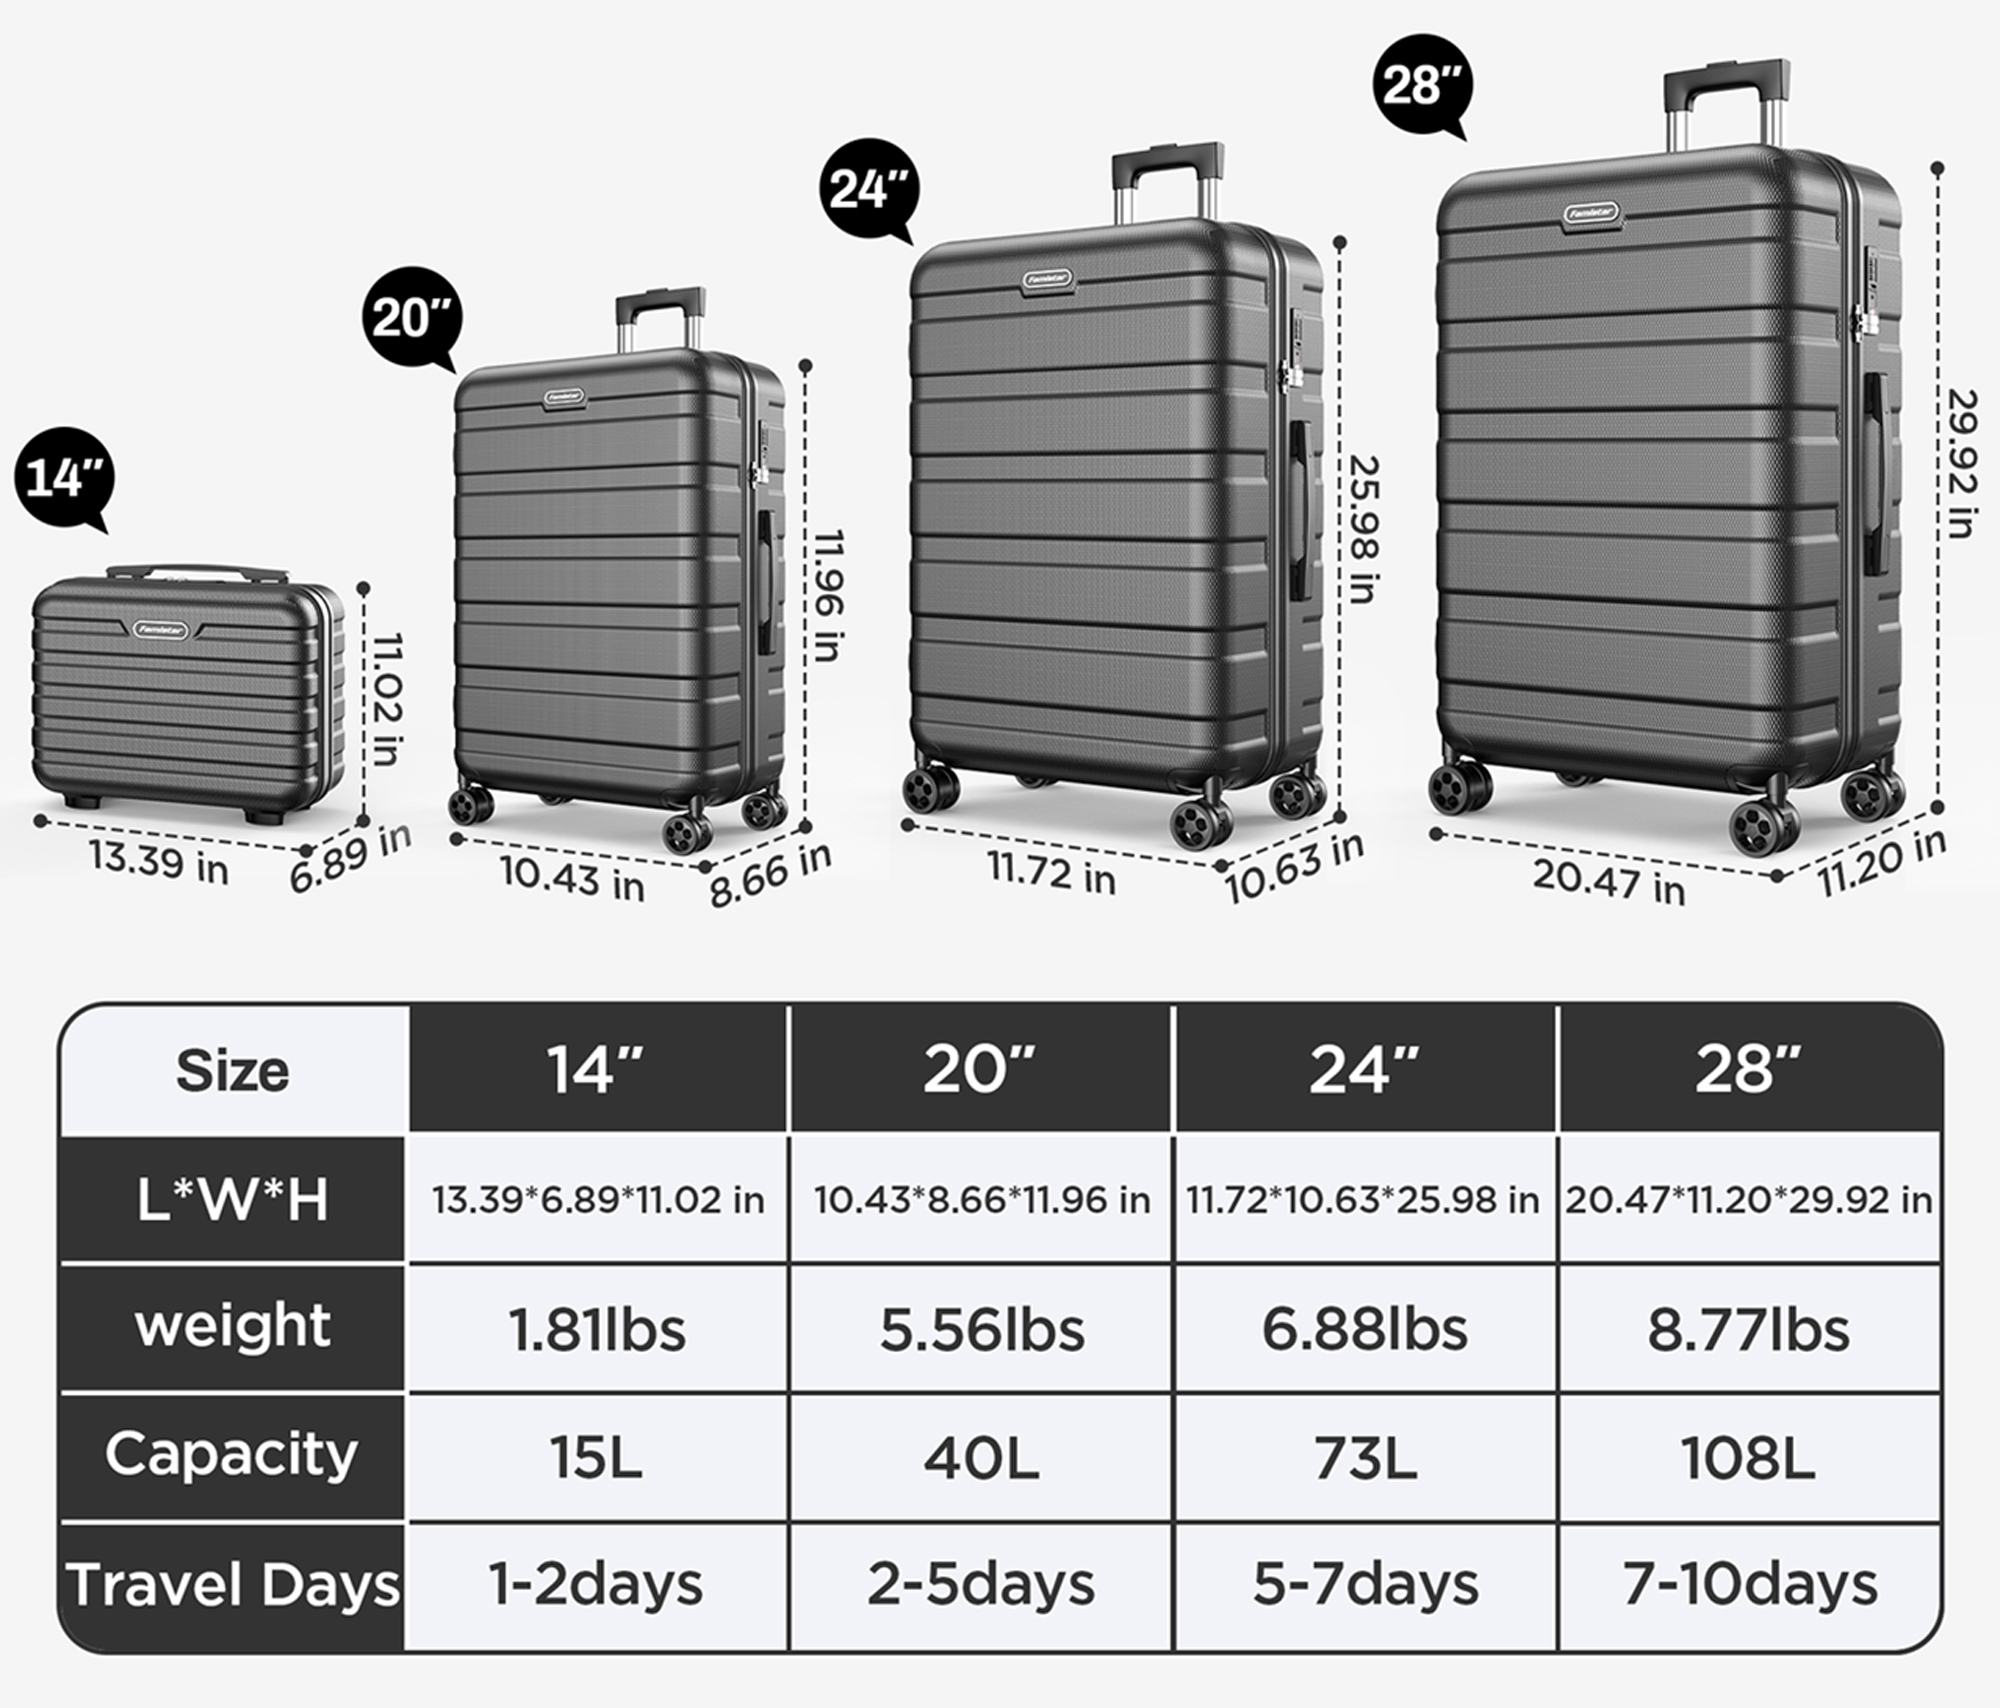 Famistar 4 Piece Hardside Luggage Suitcase Set with 360° Double Spinner Wheels Integrated TSA Lock, 14” Travel Case, 20" Carry-On Luggage, 24" Checked Luggage and 28" Checked Luggage, Black - image 4 of 11